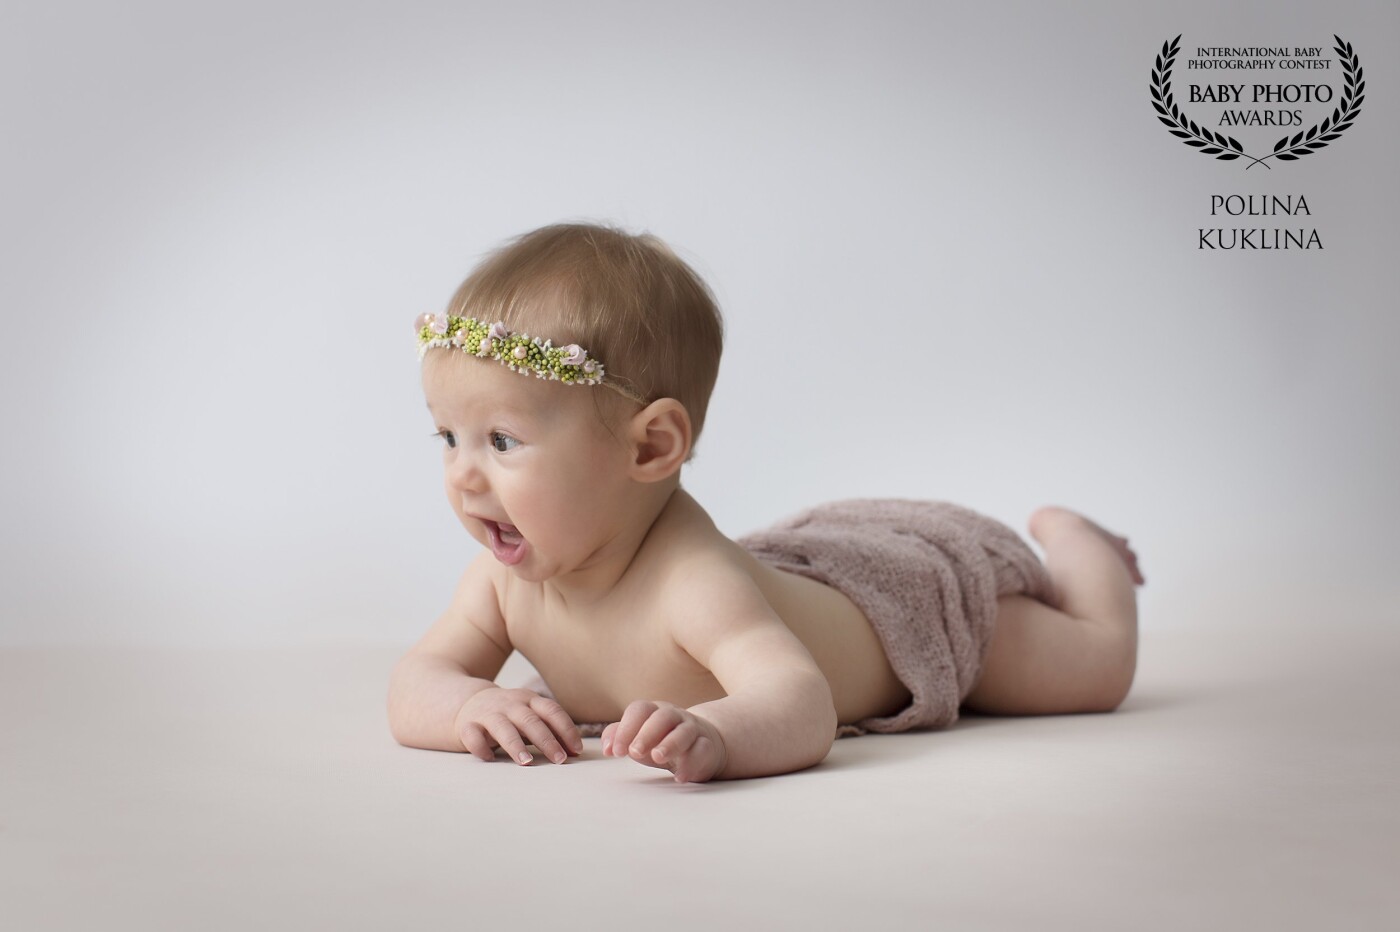 Baby Thea visits the studio every 3 months for her milestone session. It is amazing to watch her grow. She is so curious and adorable little girl! 